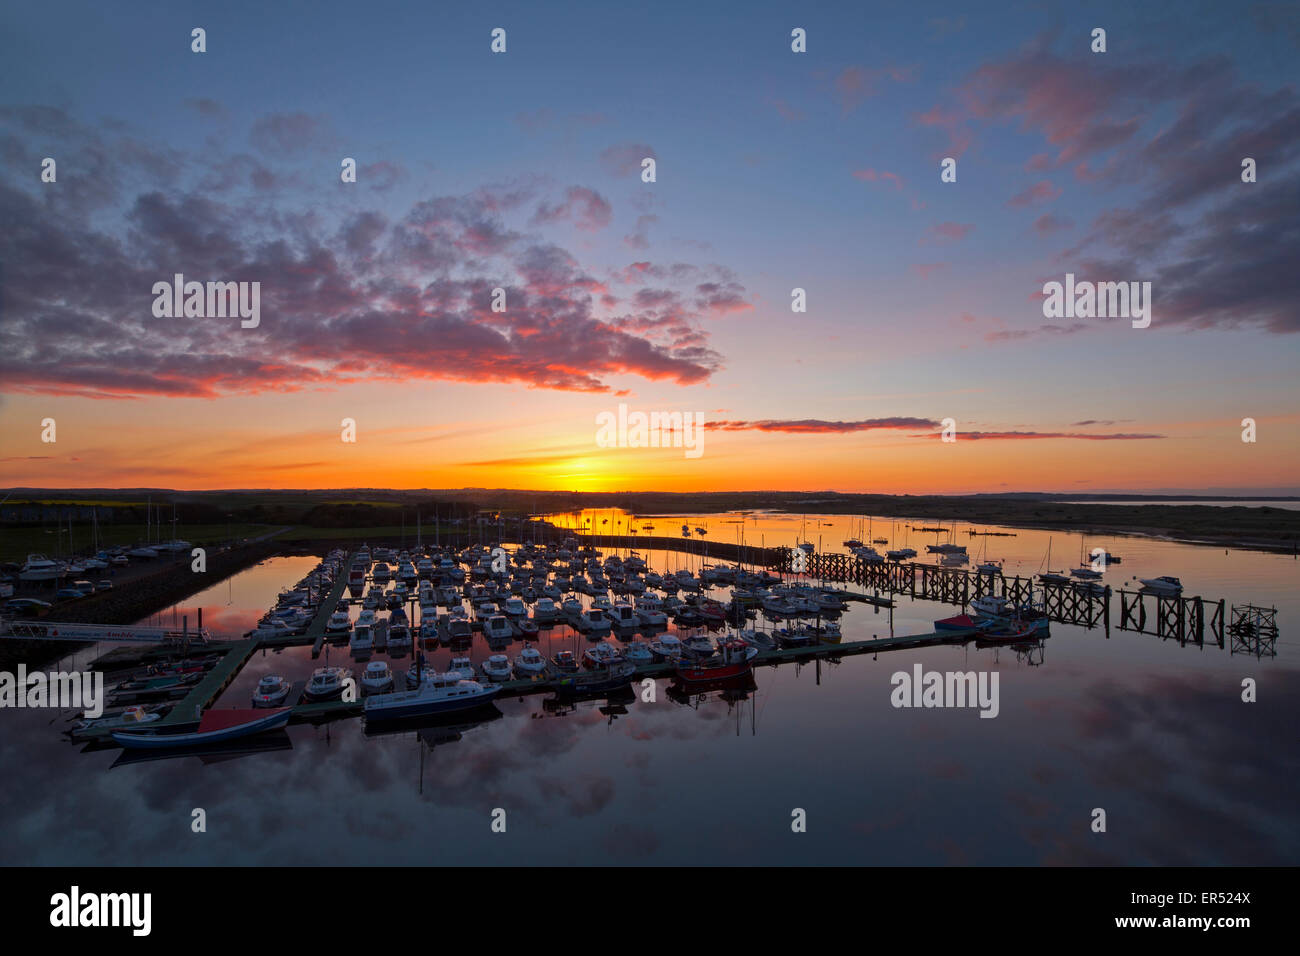 A view of Amble marina in Northumberland in spring at sunset looking towards Warkworth village from an elevated viewpoint Stock Photo